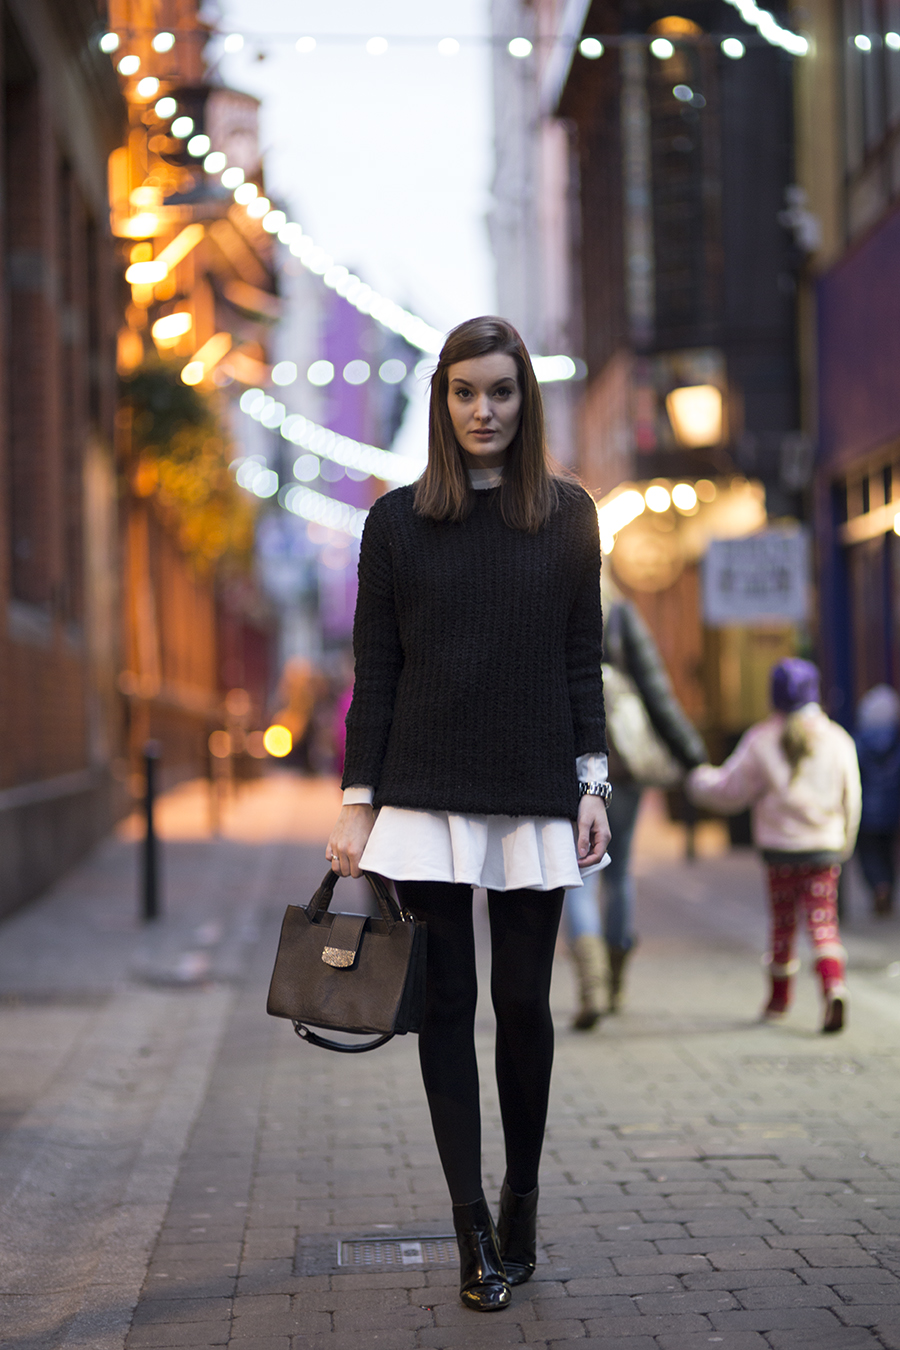 Can I wear a white dress with black tights - Personal Shopper